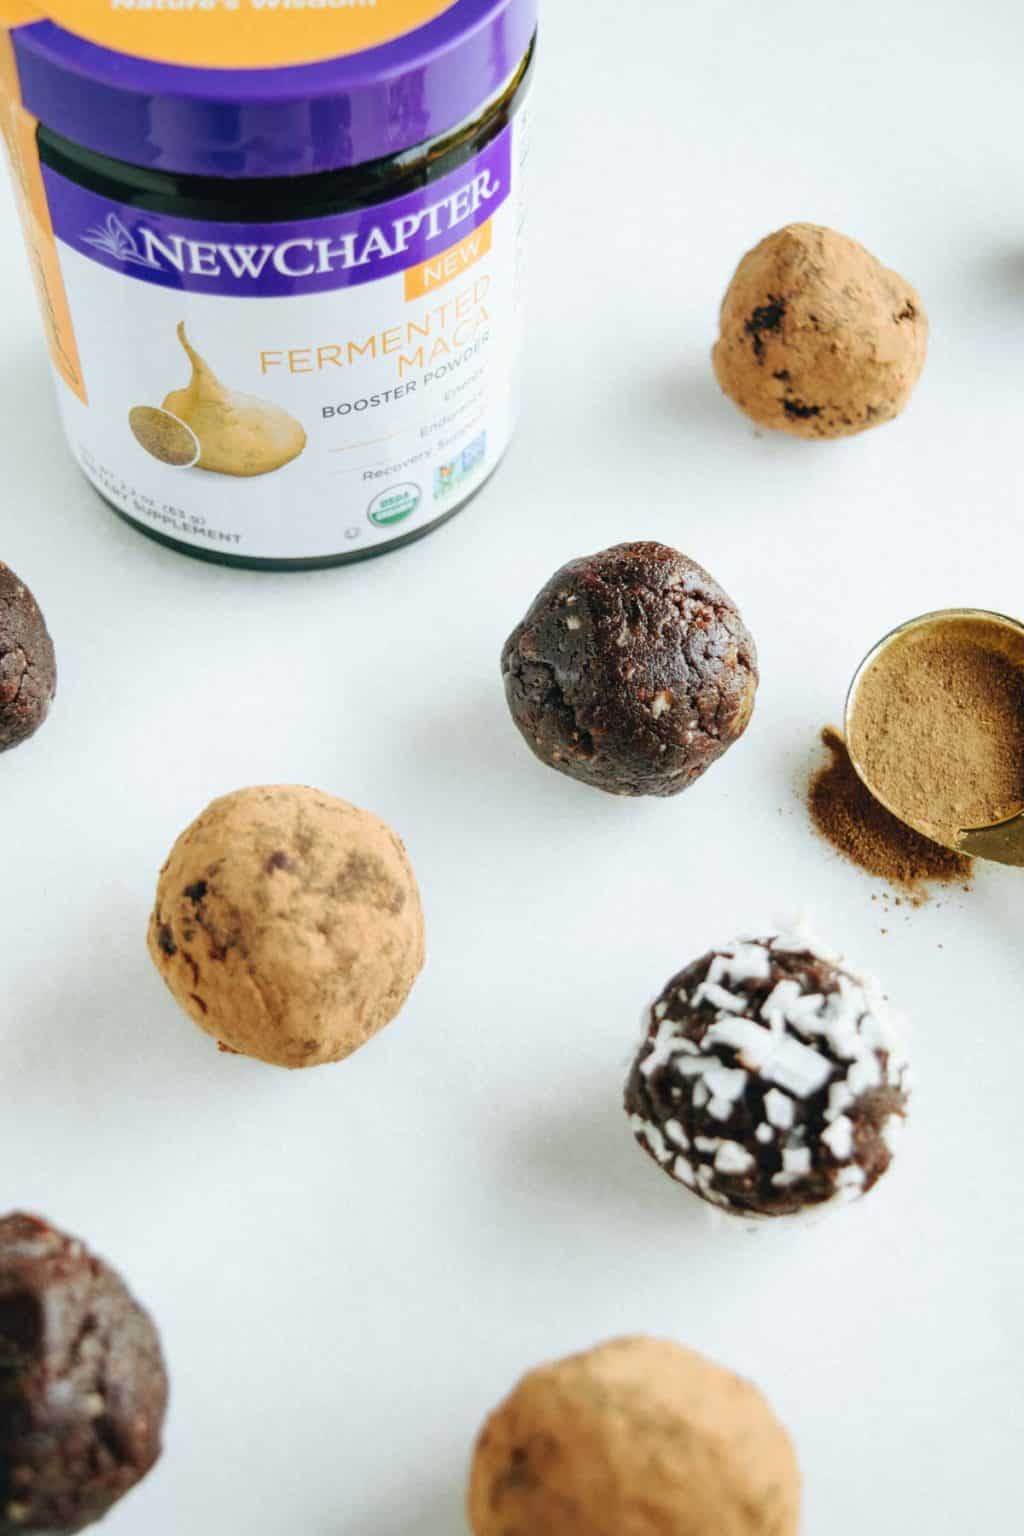 These perfect little dessert bites are made with dates, oats, cacao powder, maca powder for a nutritional powerhouse that tastes like dessert!